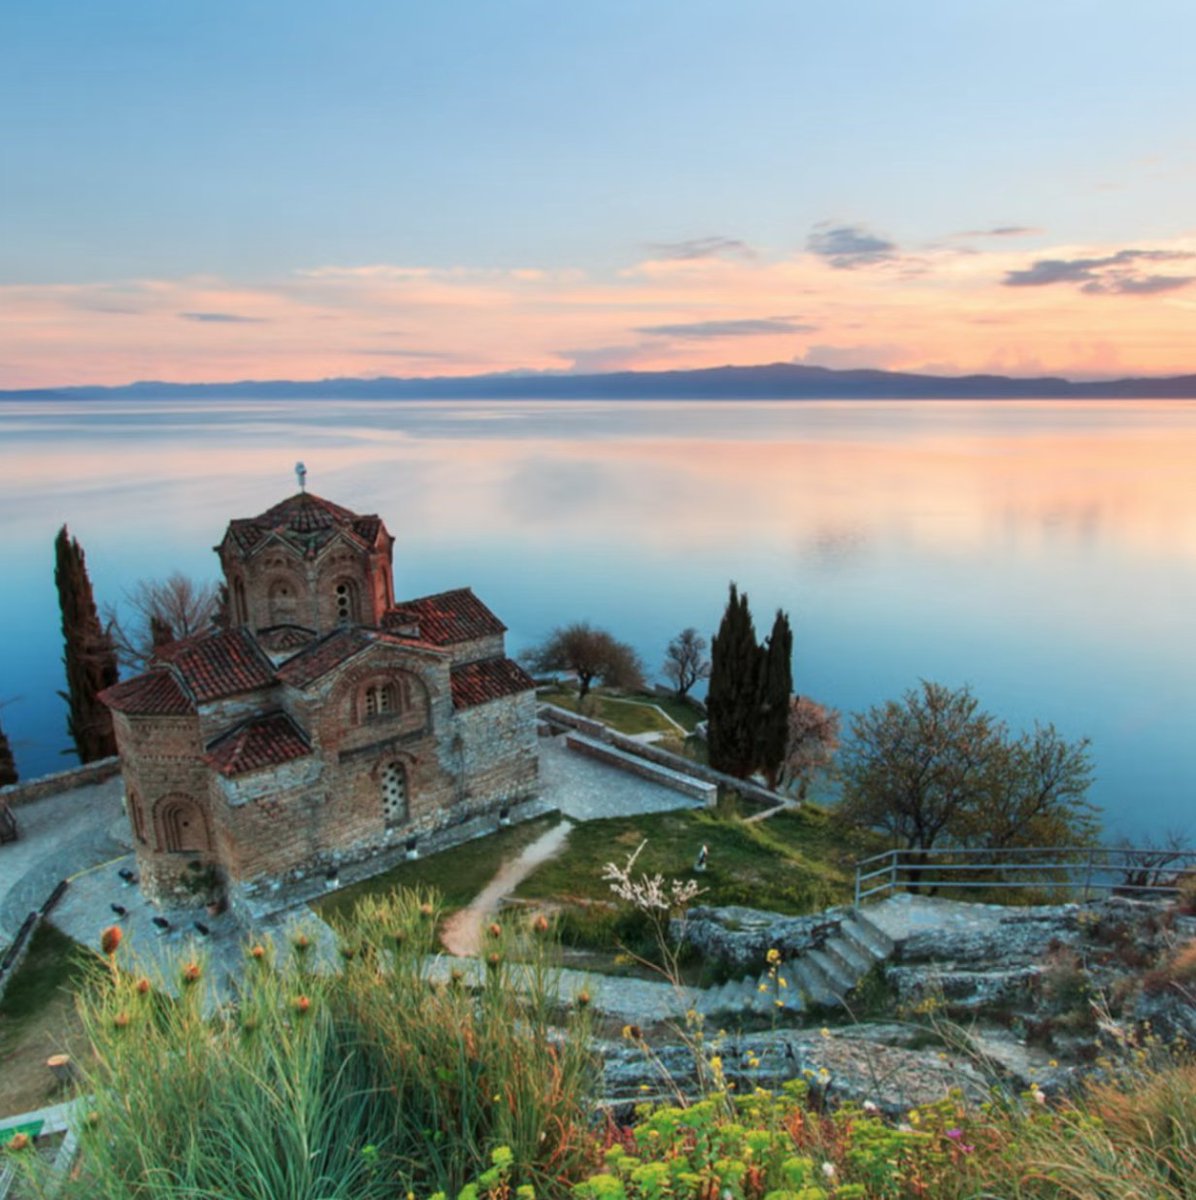 #Ohrid in North Macedonia is a hidden gem.Explore the #monasteries which dot the shoreline, visit sprawling ancient #Greek and #Roman ruins and dine on fresh #seafood on the water's edge as the sun goes down.#NorthMacedonia#AncientRuins#Explore#Travel#Wanderlust#Bucketlist#Unique